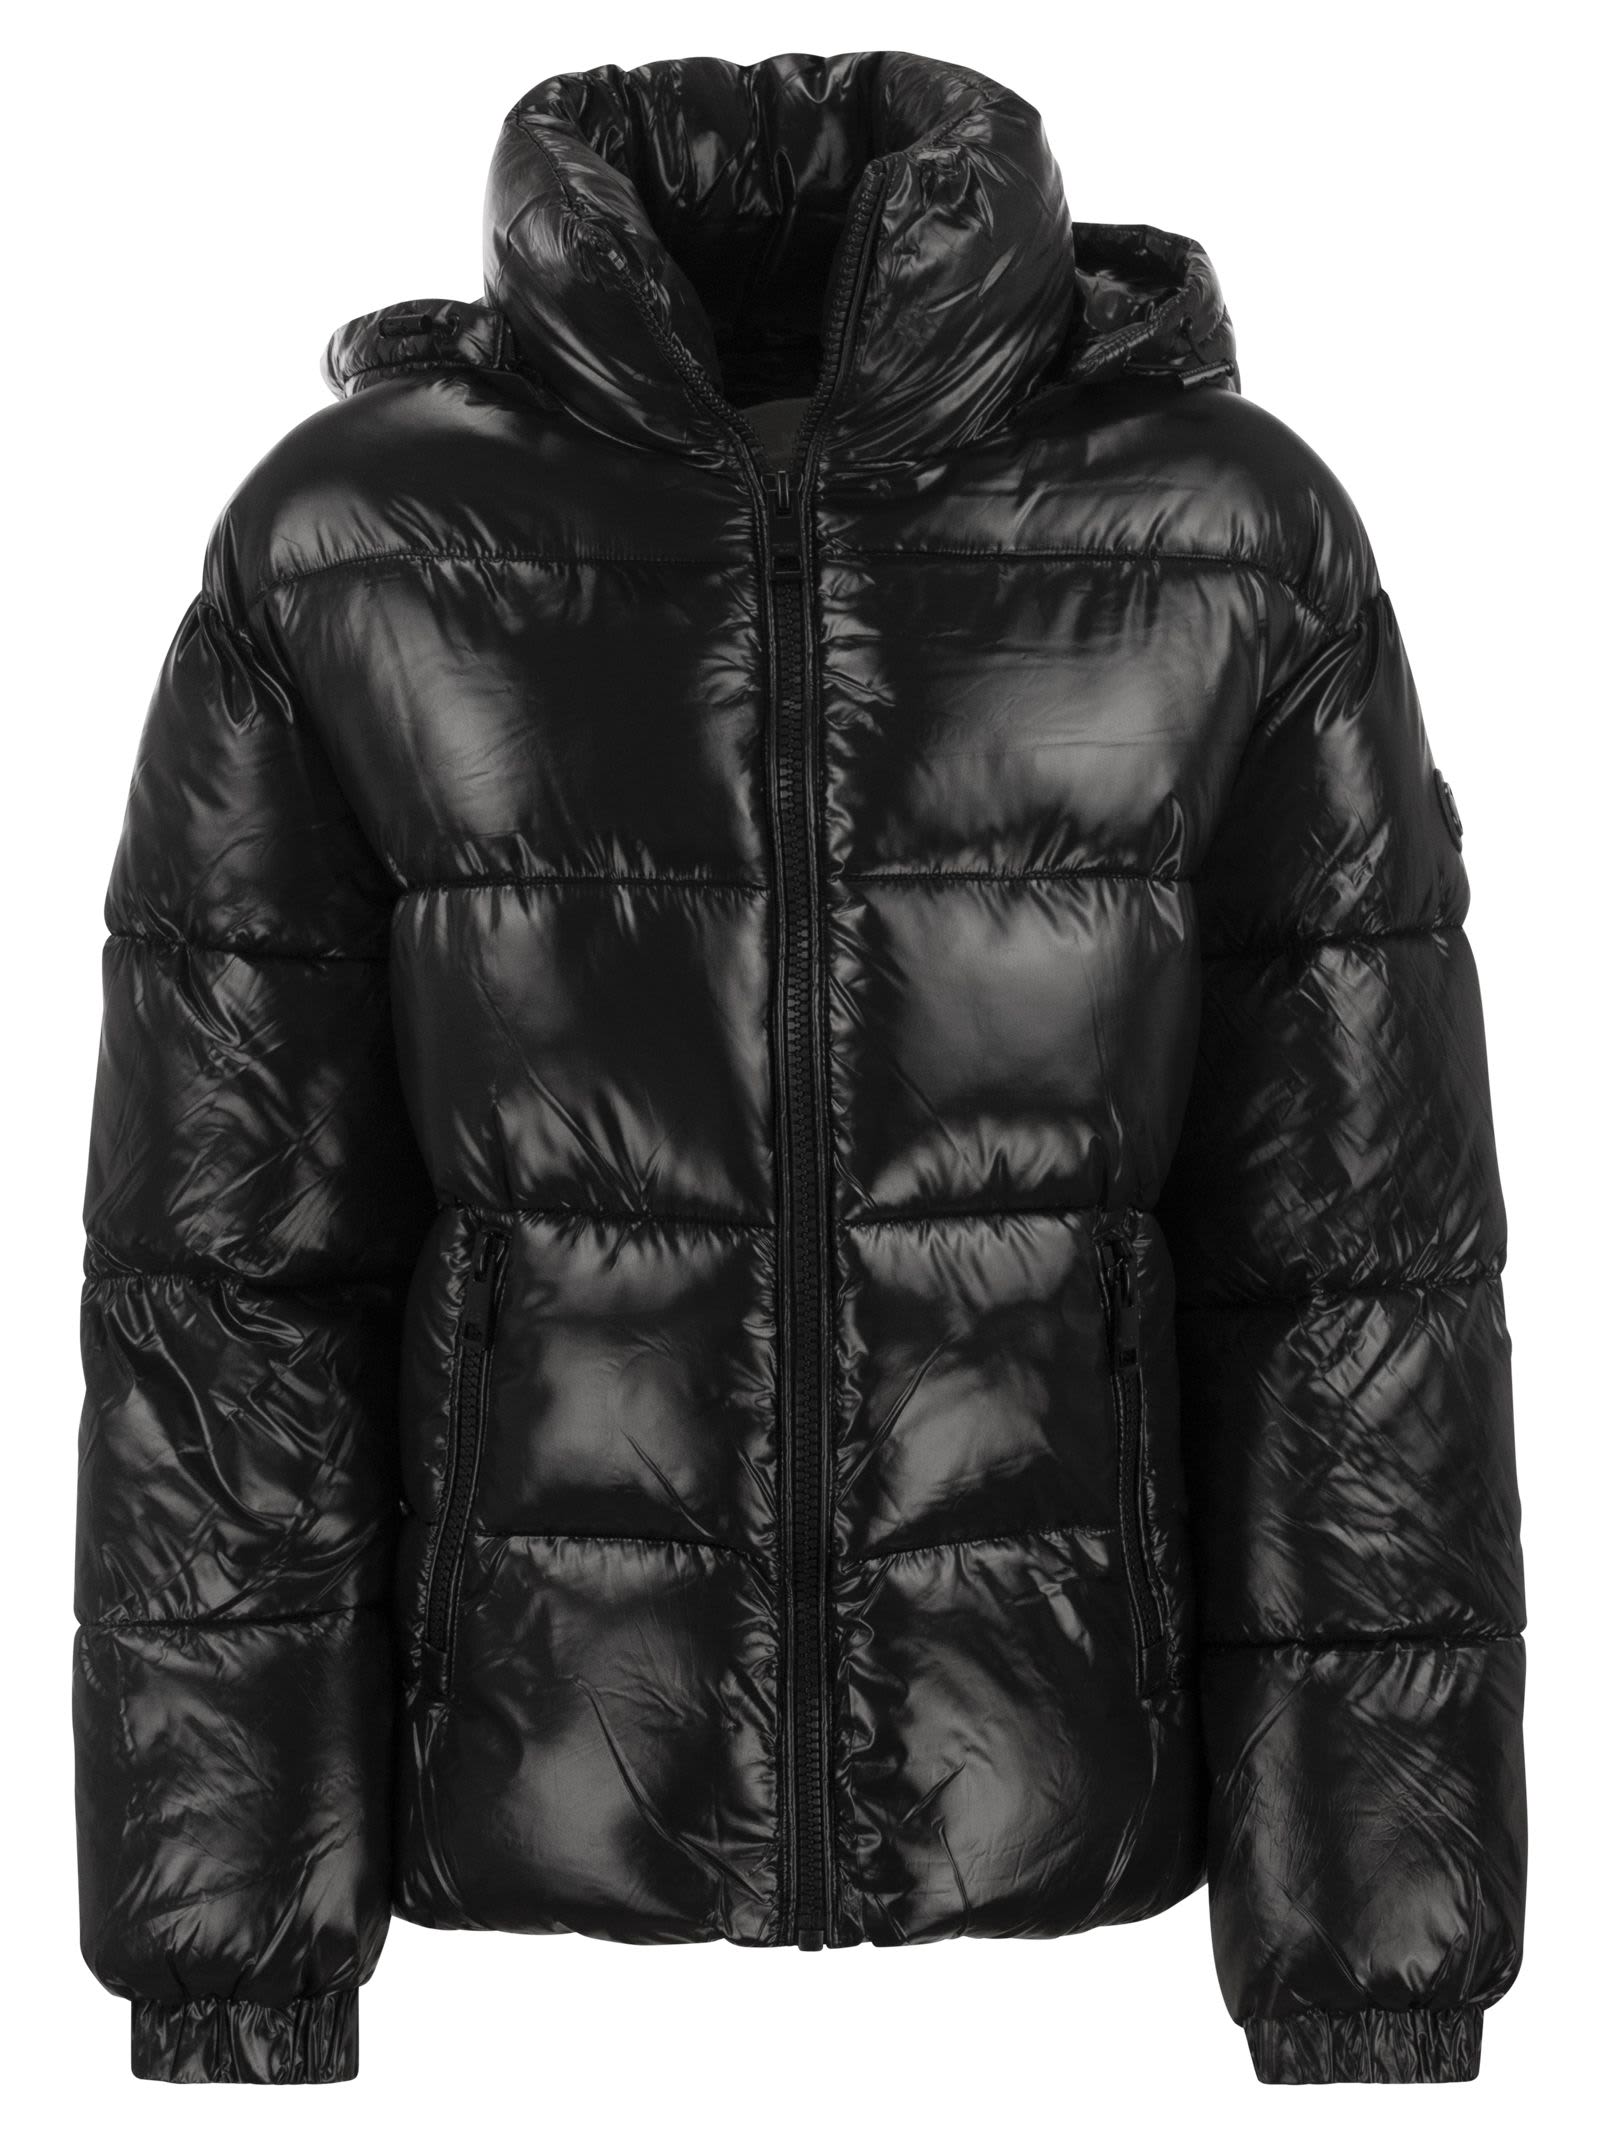 Michael Kors Hooded Down Jacket With Glossy Finish